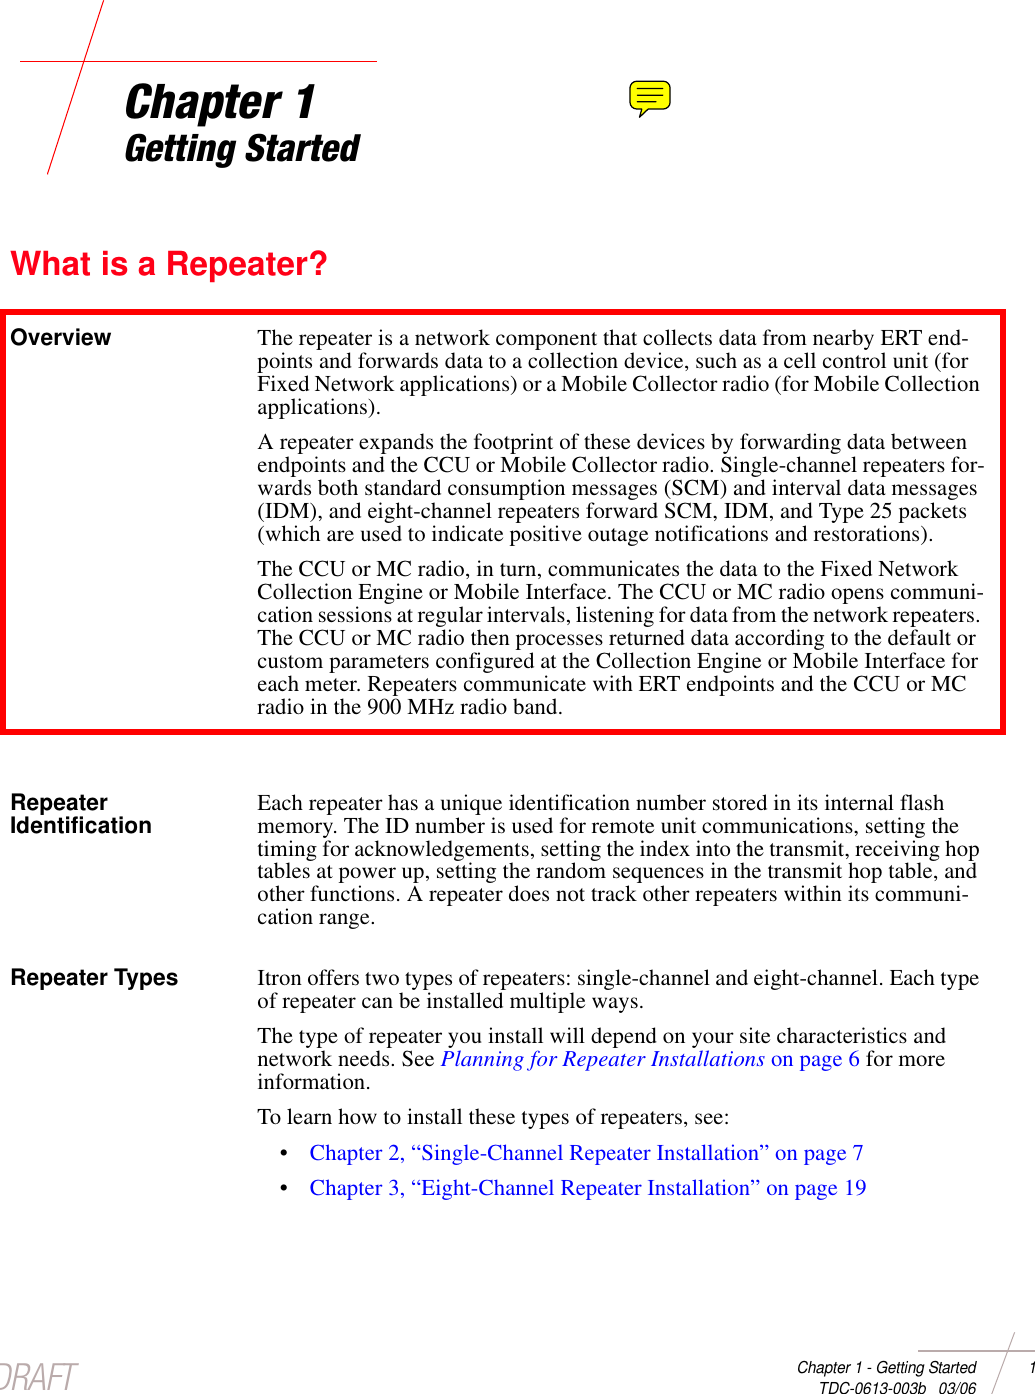 DRAFTChapter 1 - Getting Started 1 TDC-0613-003b   03/06Chapter 1Getting StartedWhat is a Repeater?Overview The repeater is a network component that collects data from nearby ERT end-points and forwards data to a collection device, such as a cell control unit (for Fixed Network applications) or a Mobile Collector radio (for Mobile Collection applications). A repeater expands the footprint of these devices by forwarding data between endpoints and the CCU or Mobile Collector radio. Single-channel repeaters for-wards both standard consumption messages (SCM) and interval data messages (IDM), and eight-channel repeaters forward SCM, IDM, and Type 25 packets (which are used to indicate positive outage notifications and restorations).The CCU or MC radio, in turn, communicates the data to the Fixed Network Collection Engine or Mobile Interface. The CCU or MC radio opens communi-cation sessions at regular intervals, listening for data from the network repeaters. The CCU or MC radio then processes returned data according to the default or custom parameters configured at the Collection Engine or Mobile Interface for each meter. Repeaters communicate with ERT endpoints and the CCU or MC radio in the 900 MHz radio band. Repeater Identification Each repeater has a unique identification number stored in its internal flash memory. The ID number is used for remote unit communications, setting the timing for acknowledgements, setting the index into the transmit, receiving hop tables at power up, setting the random sequences in the transmit hop table, and other functions. A repeater does not track other repeaters within its communi-cation range.Repeater Types Itron offers two types of repeaters: single-channel and eight-channel. Each type of repeater can be installed multiple ways. The type of repeater you install will depend on your site characteristics and network needs. See Planning for Repeater Installations on page 6 for more information. To learn how to install these types of repeaters, see: •Chapter 2, “Single-Channel Repeater Installation” on page 7•Chapter 3, “Eight-Channel Repeater Installation” on page 19